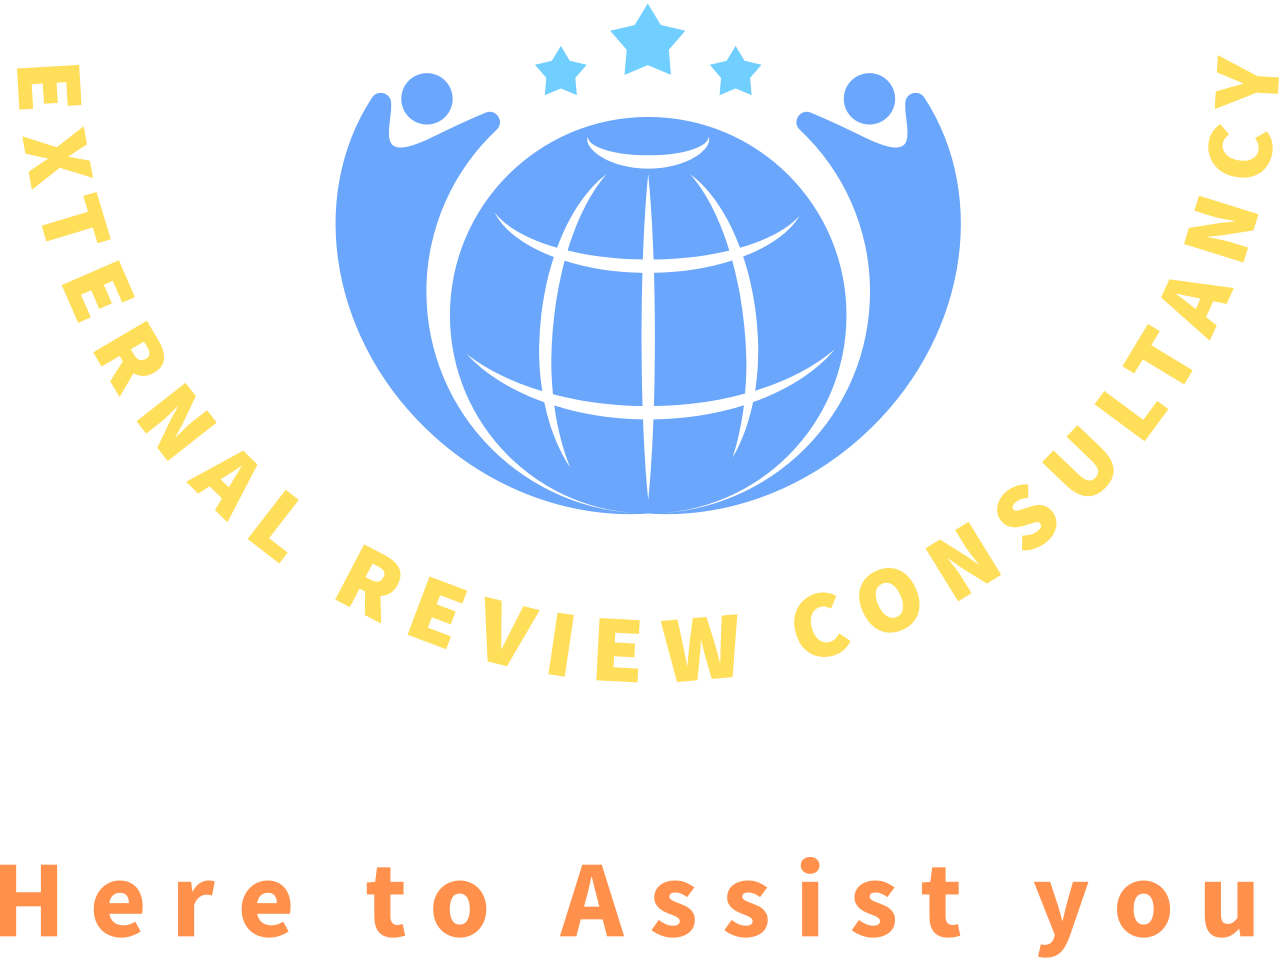 EXTERNAL REVIEW CONSULTANCY's web page